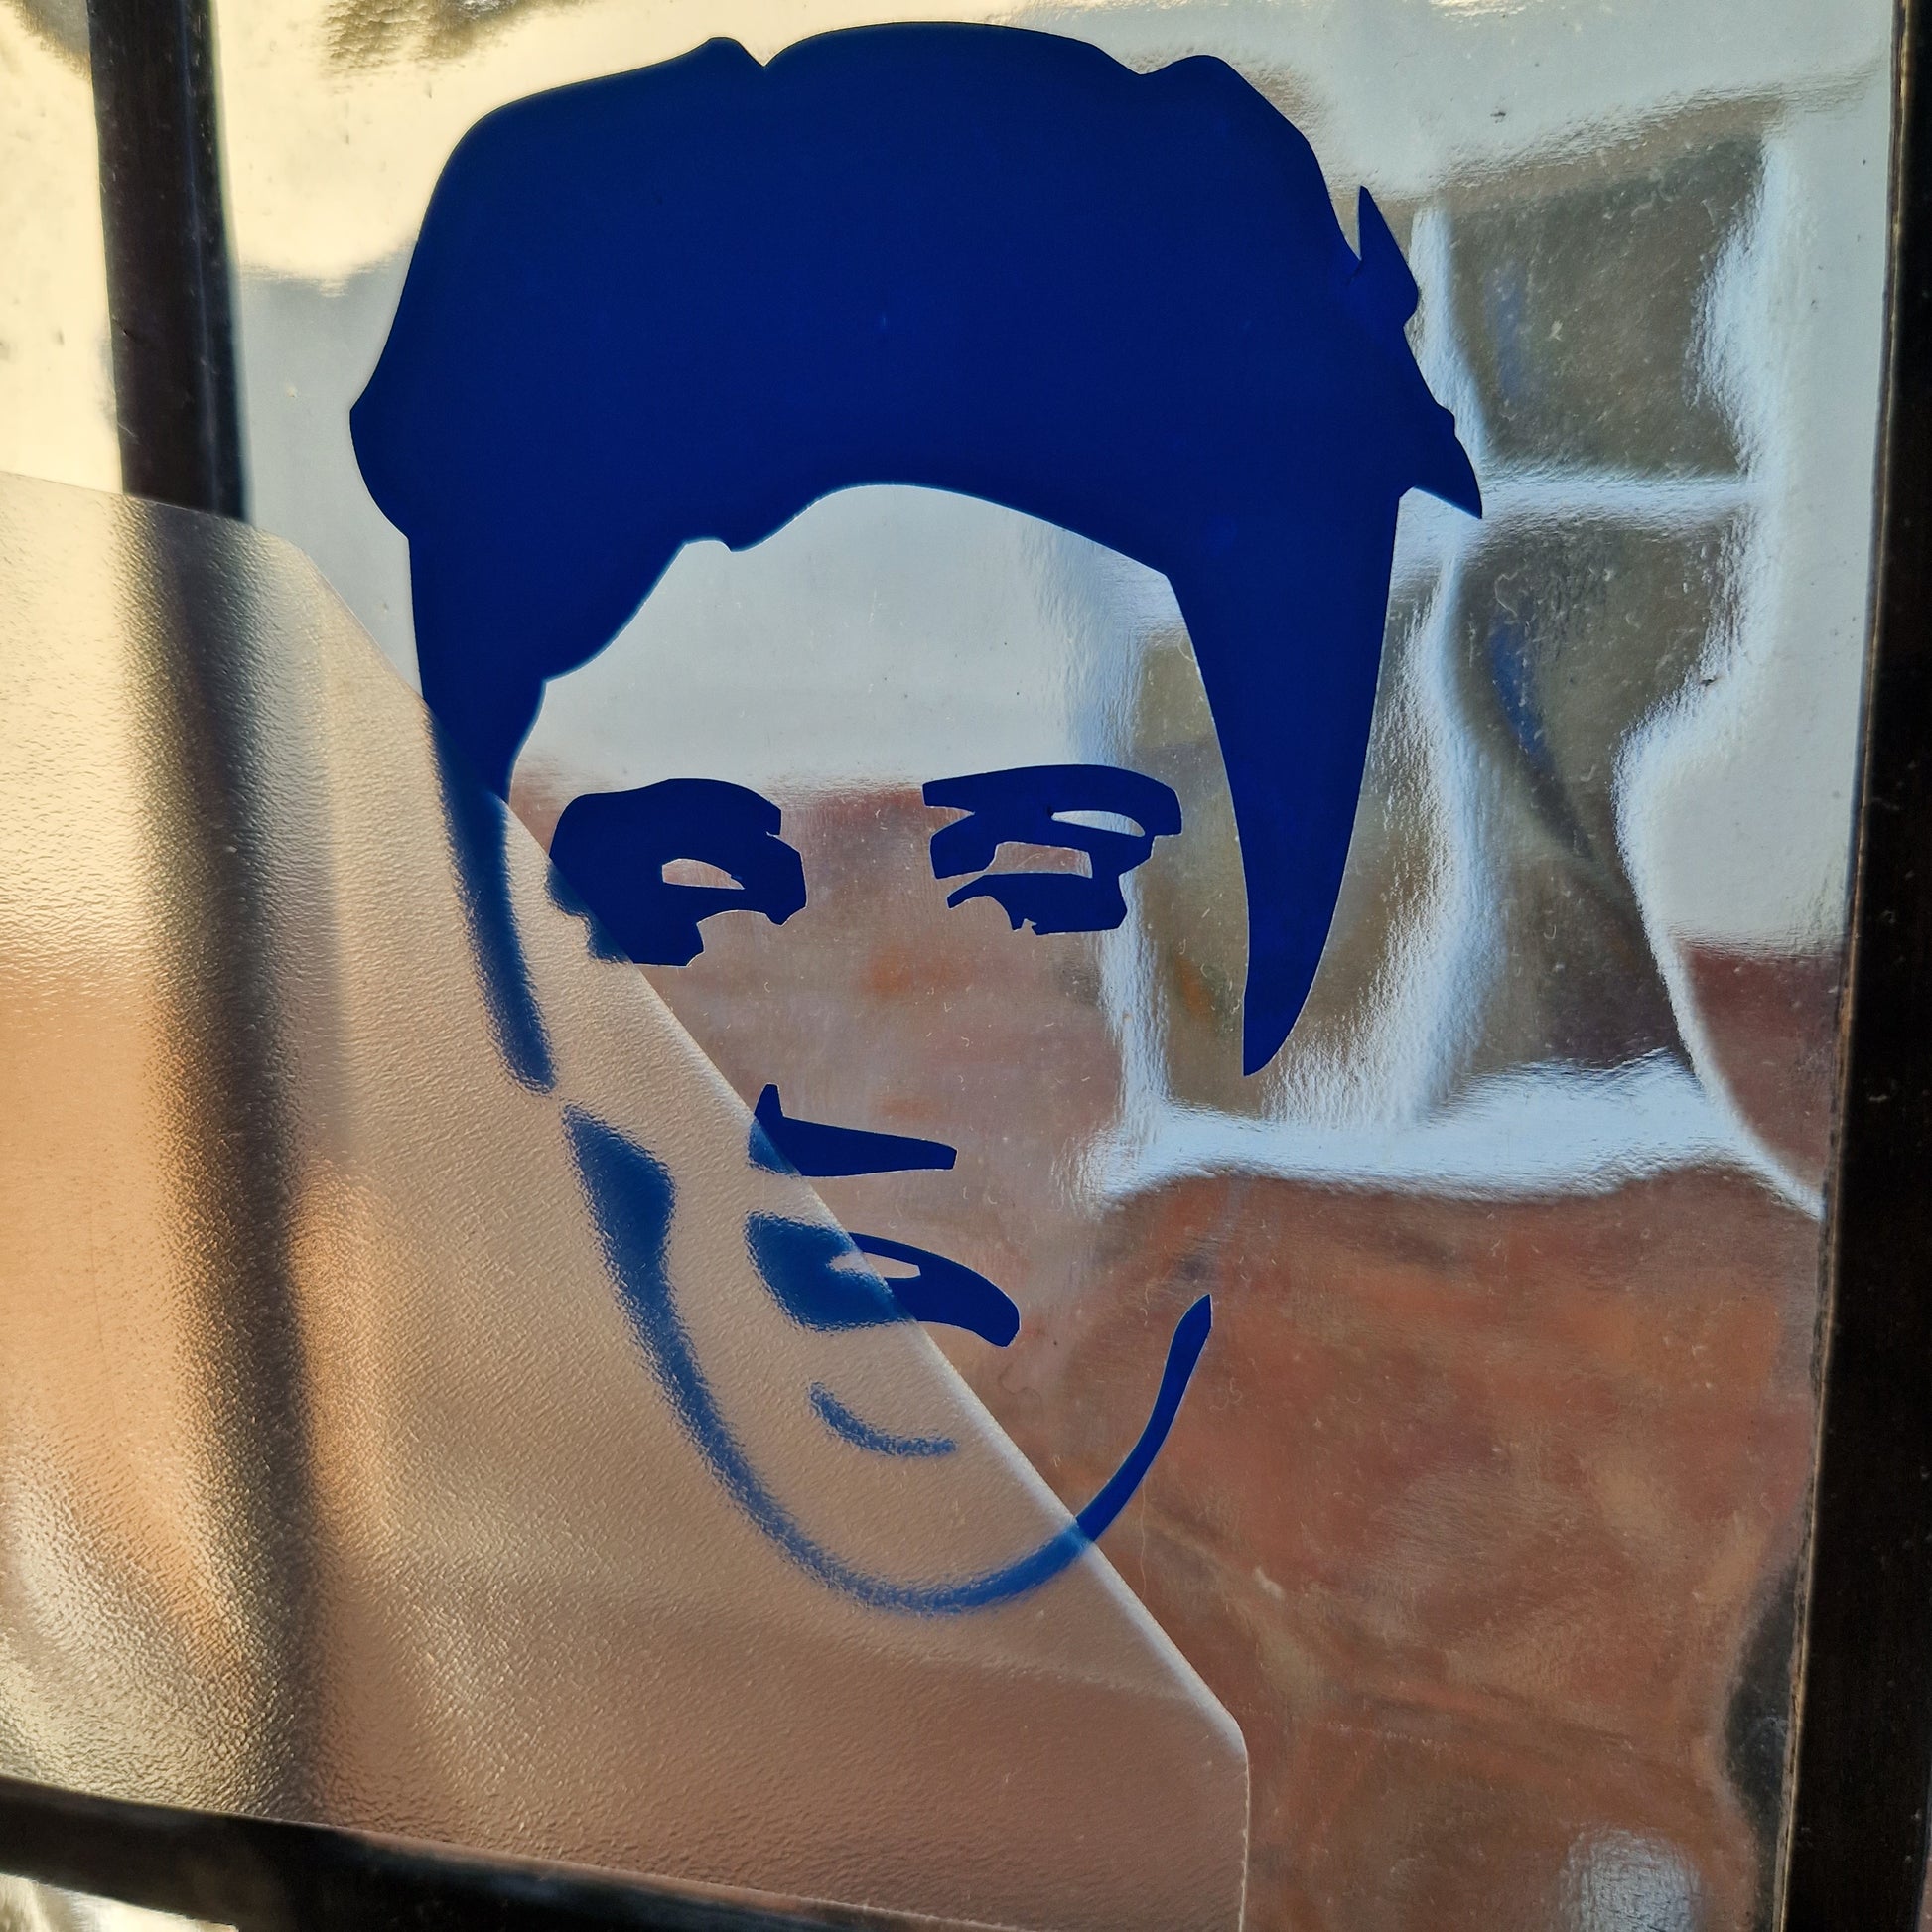 elvis presley decal being transferred onto textured glass